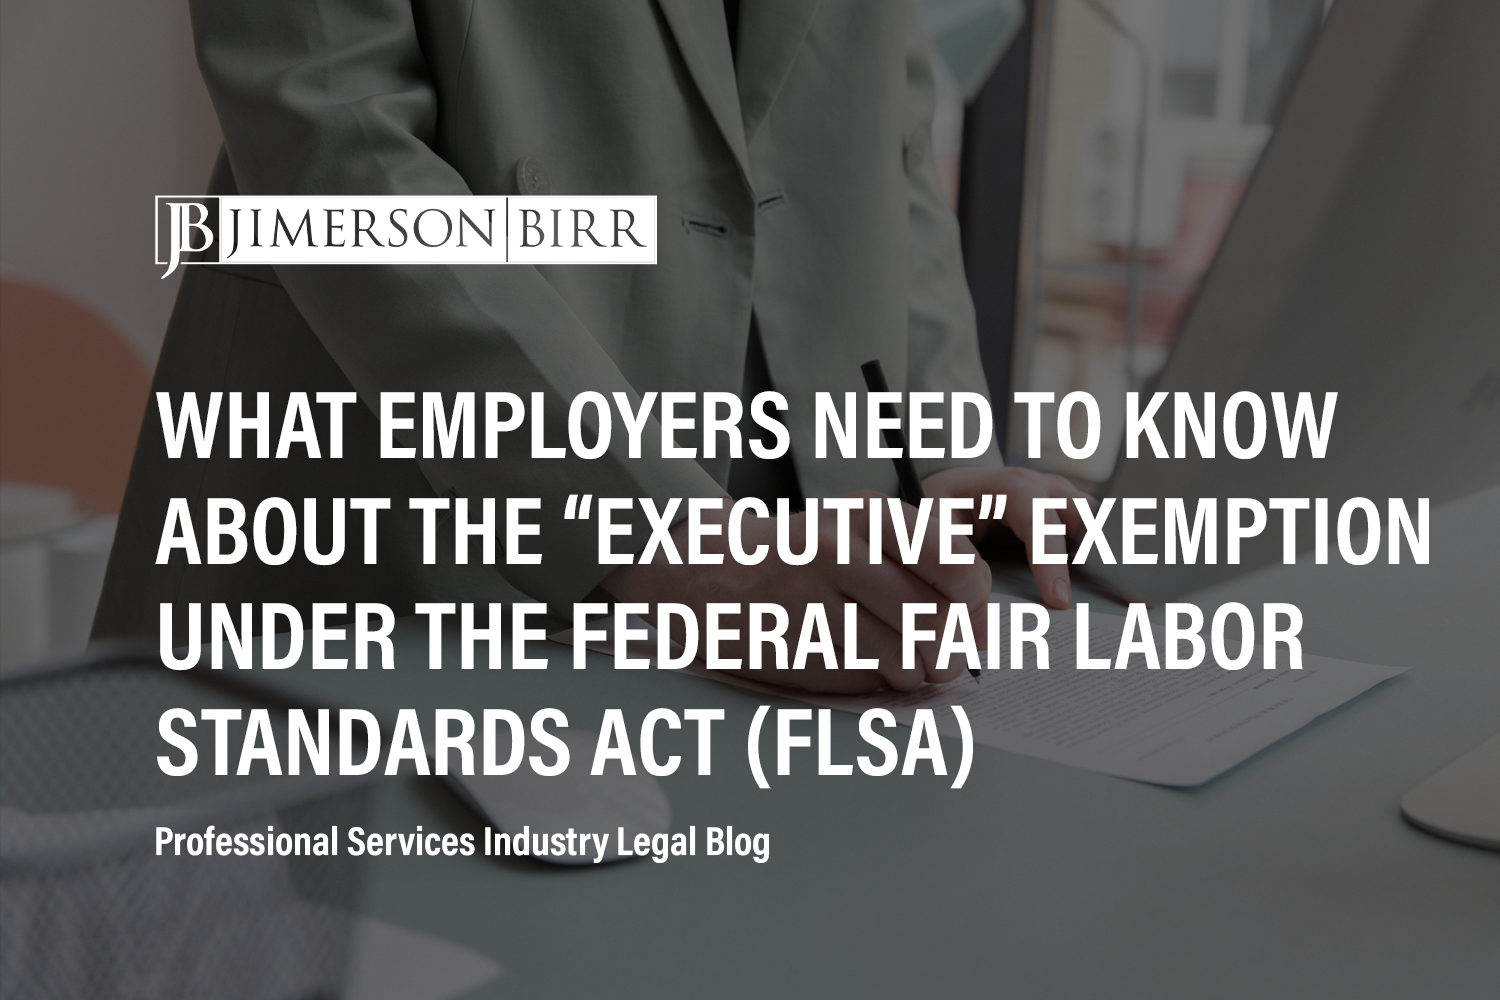 What Employers Need to Know About the “Executive” Exemption Under the Federal Fair Labor Standards Act (FLSA)